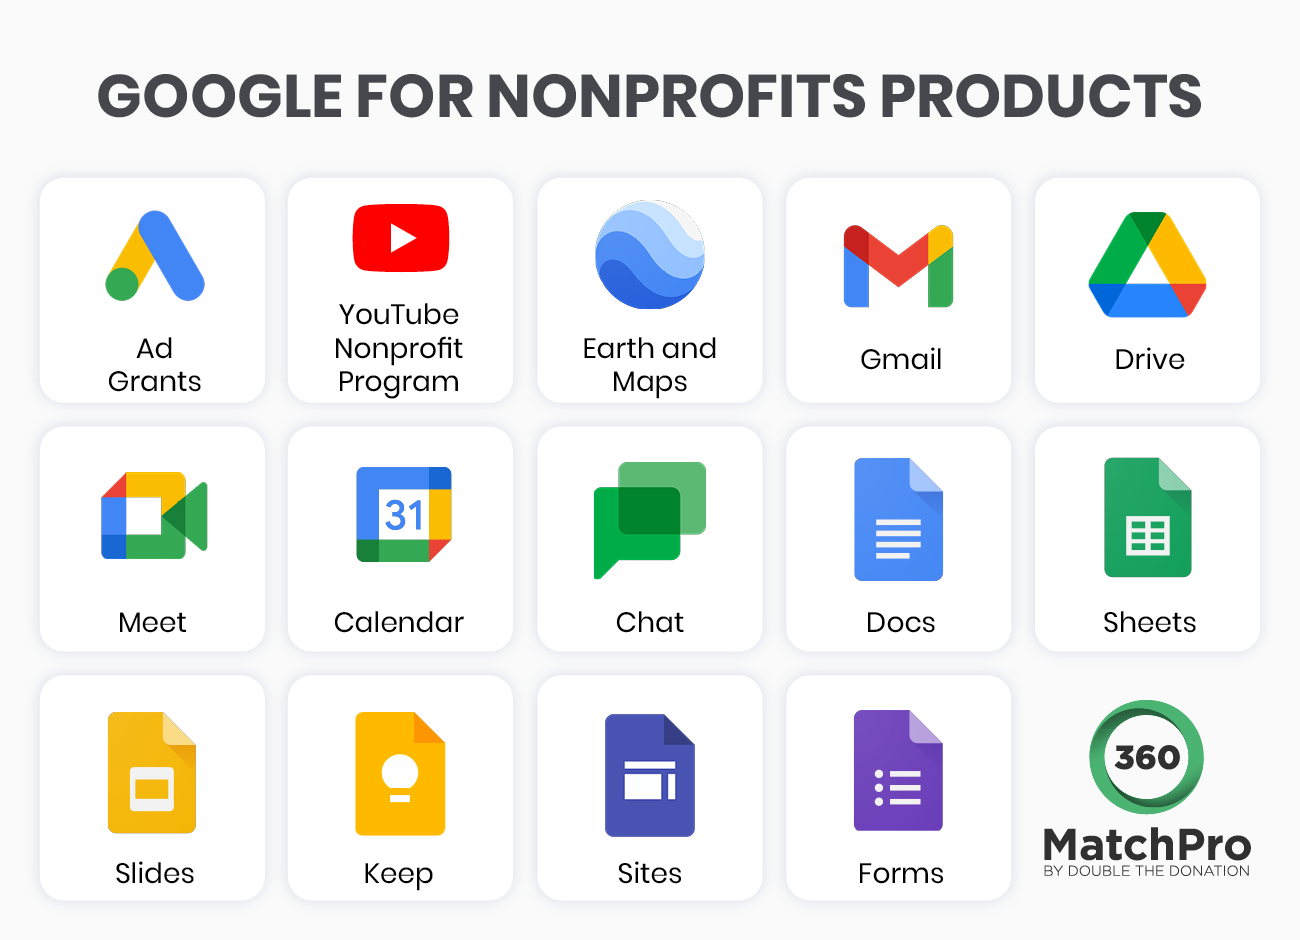 The various Google programs available for nonprofits through Google for Nonprofits are listed. 